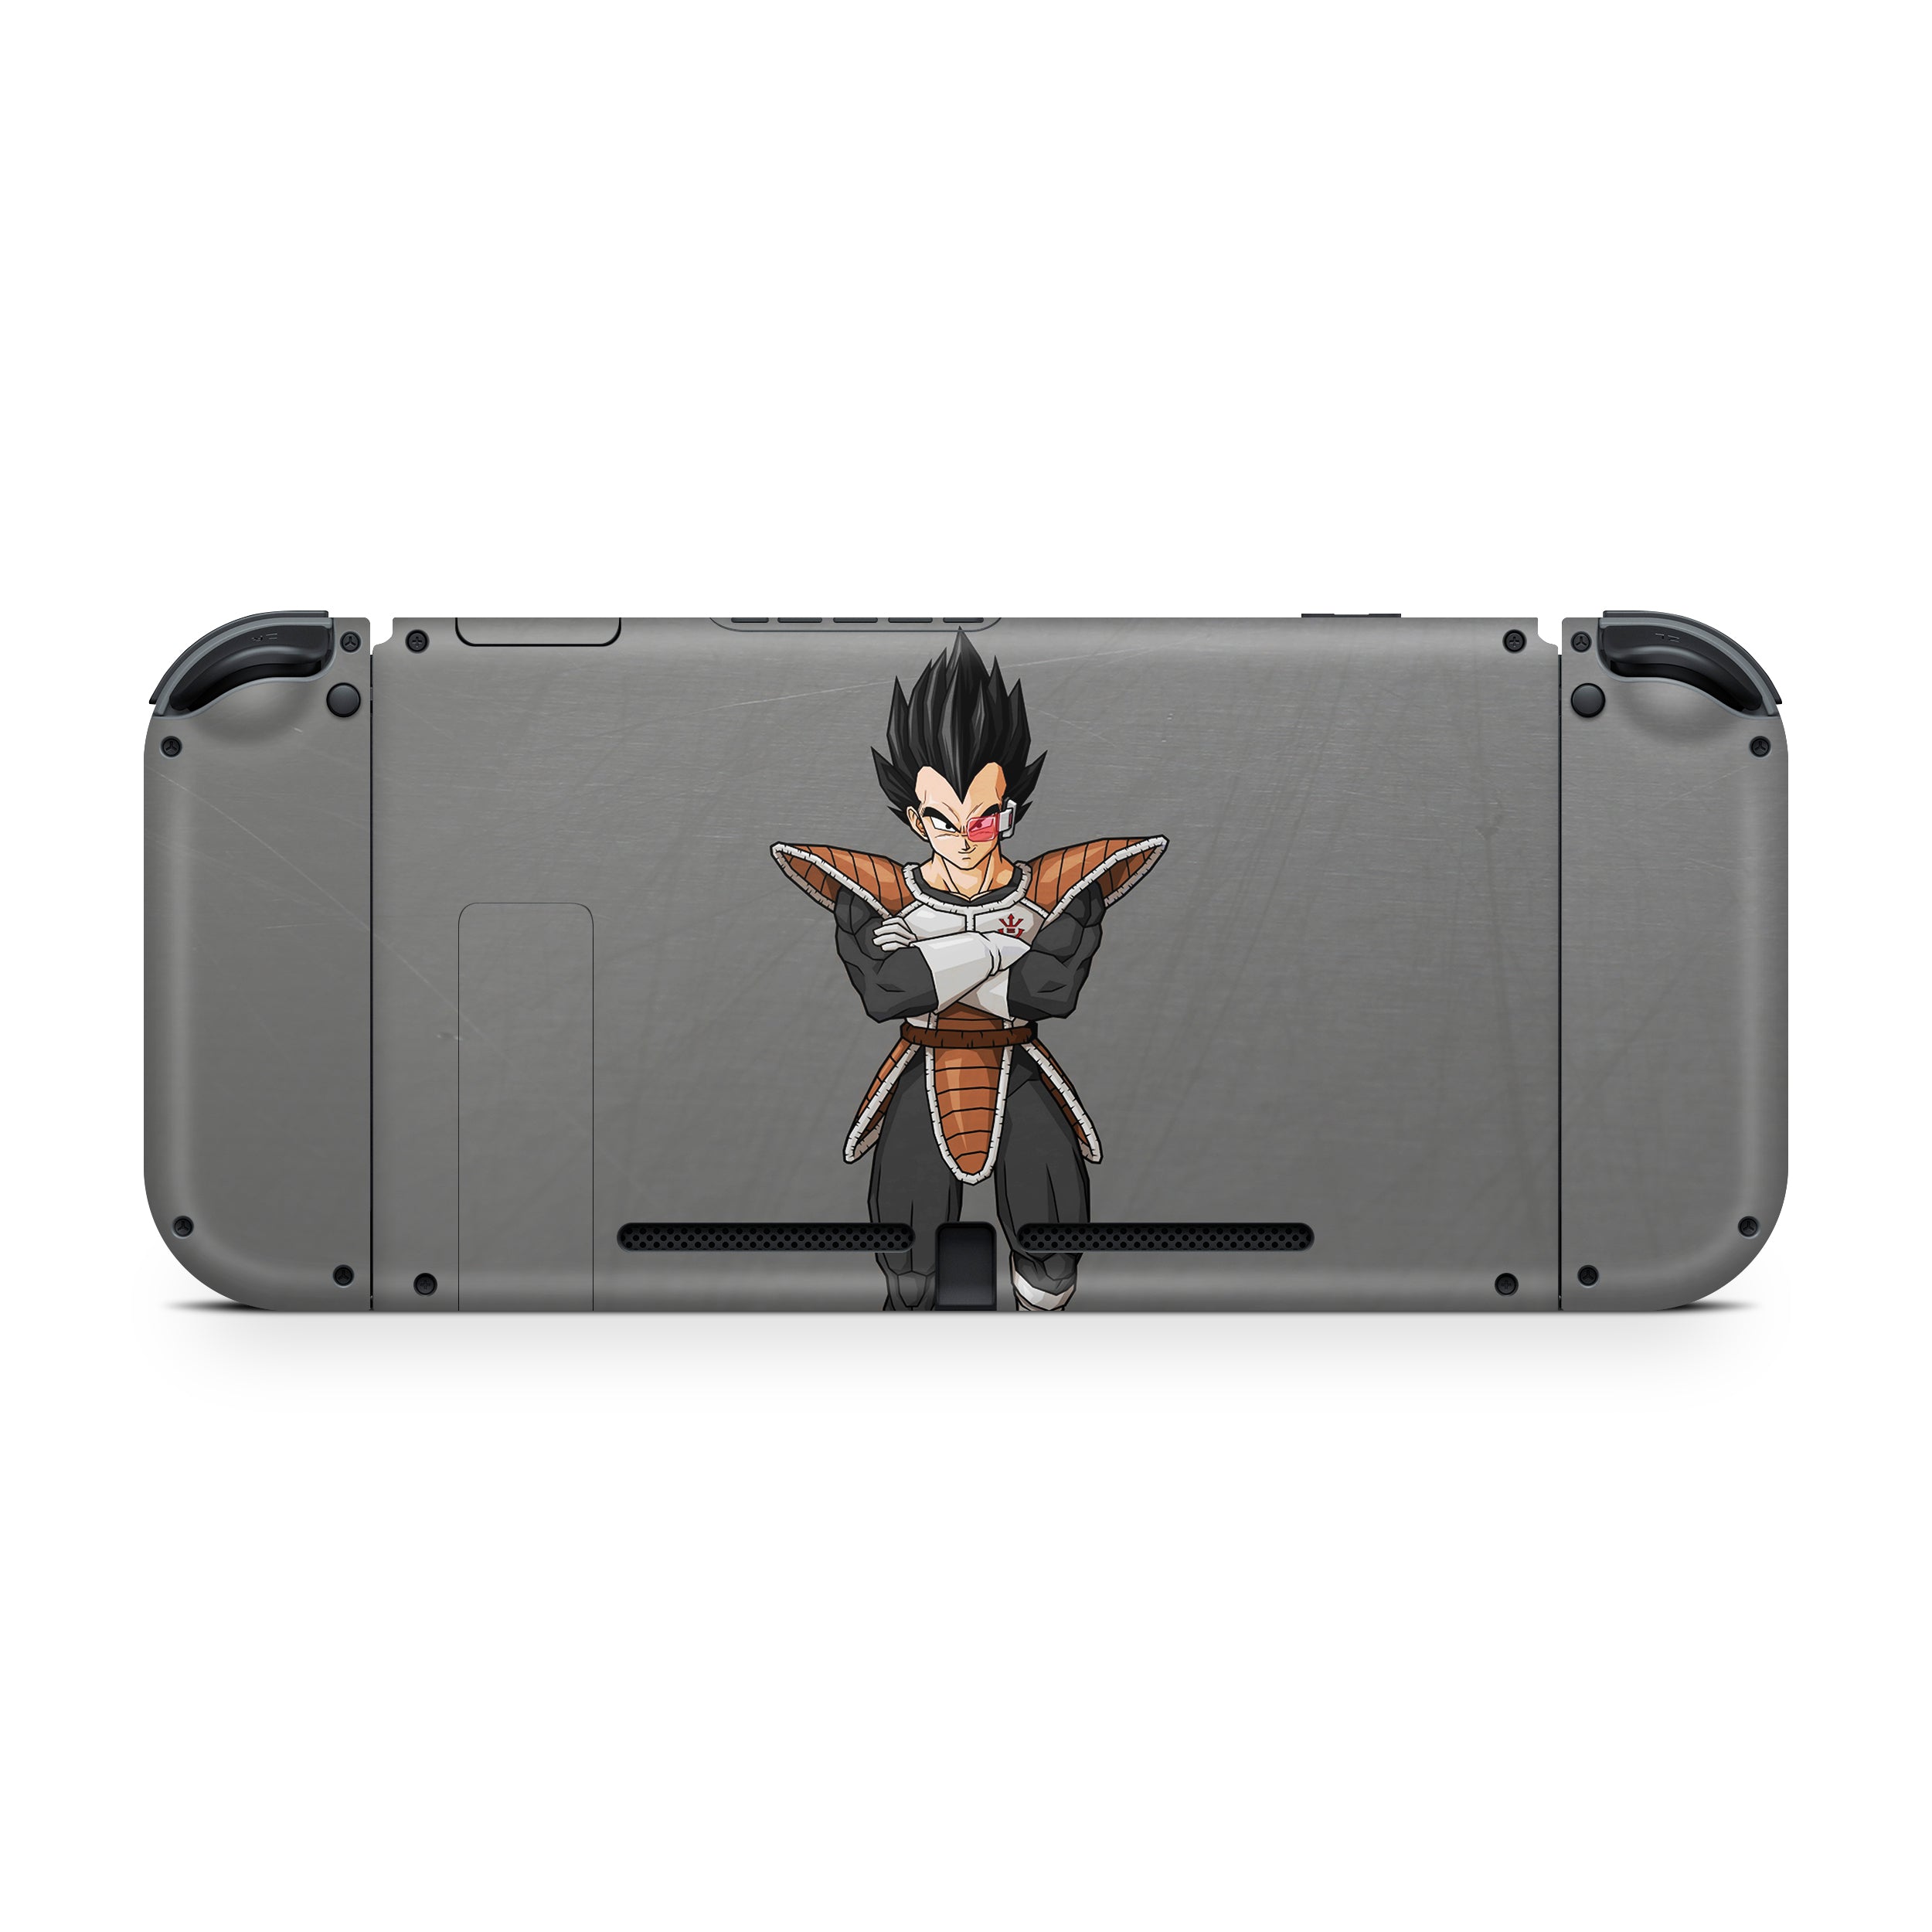 A video game skin featuring a Dragon Ball Z Vegeta design for the Nintendo Switch.